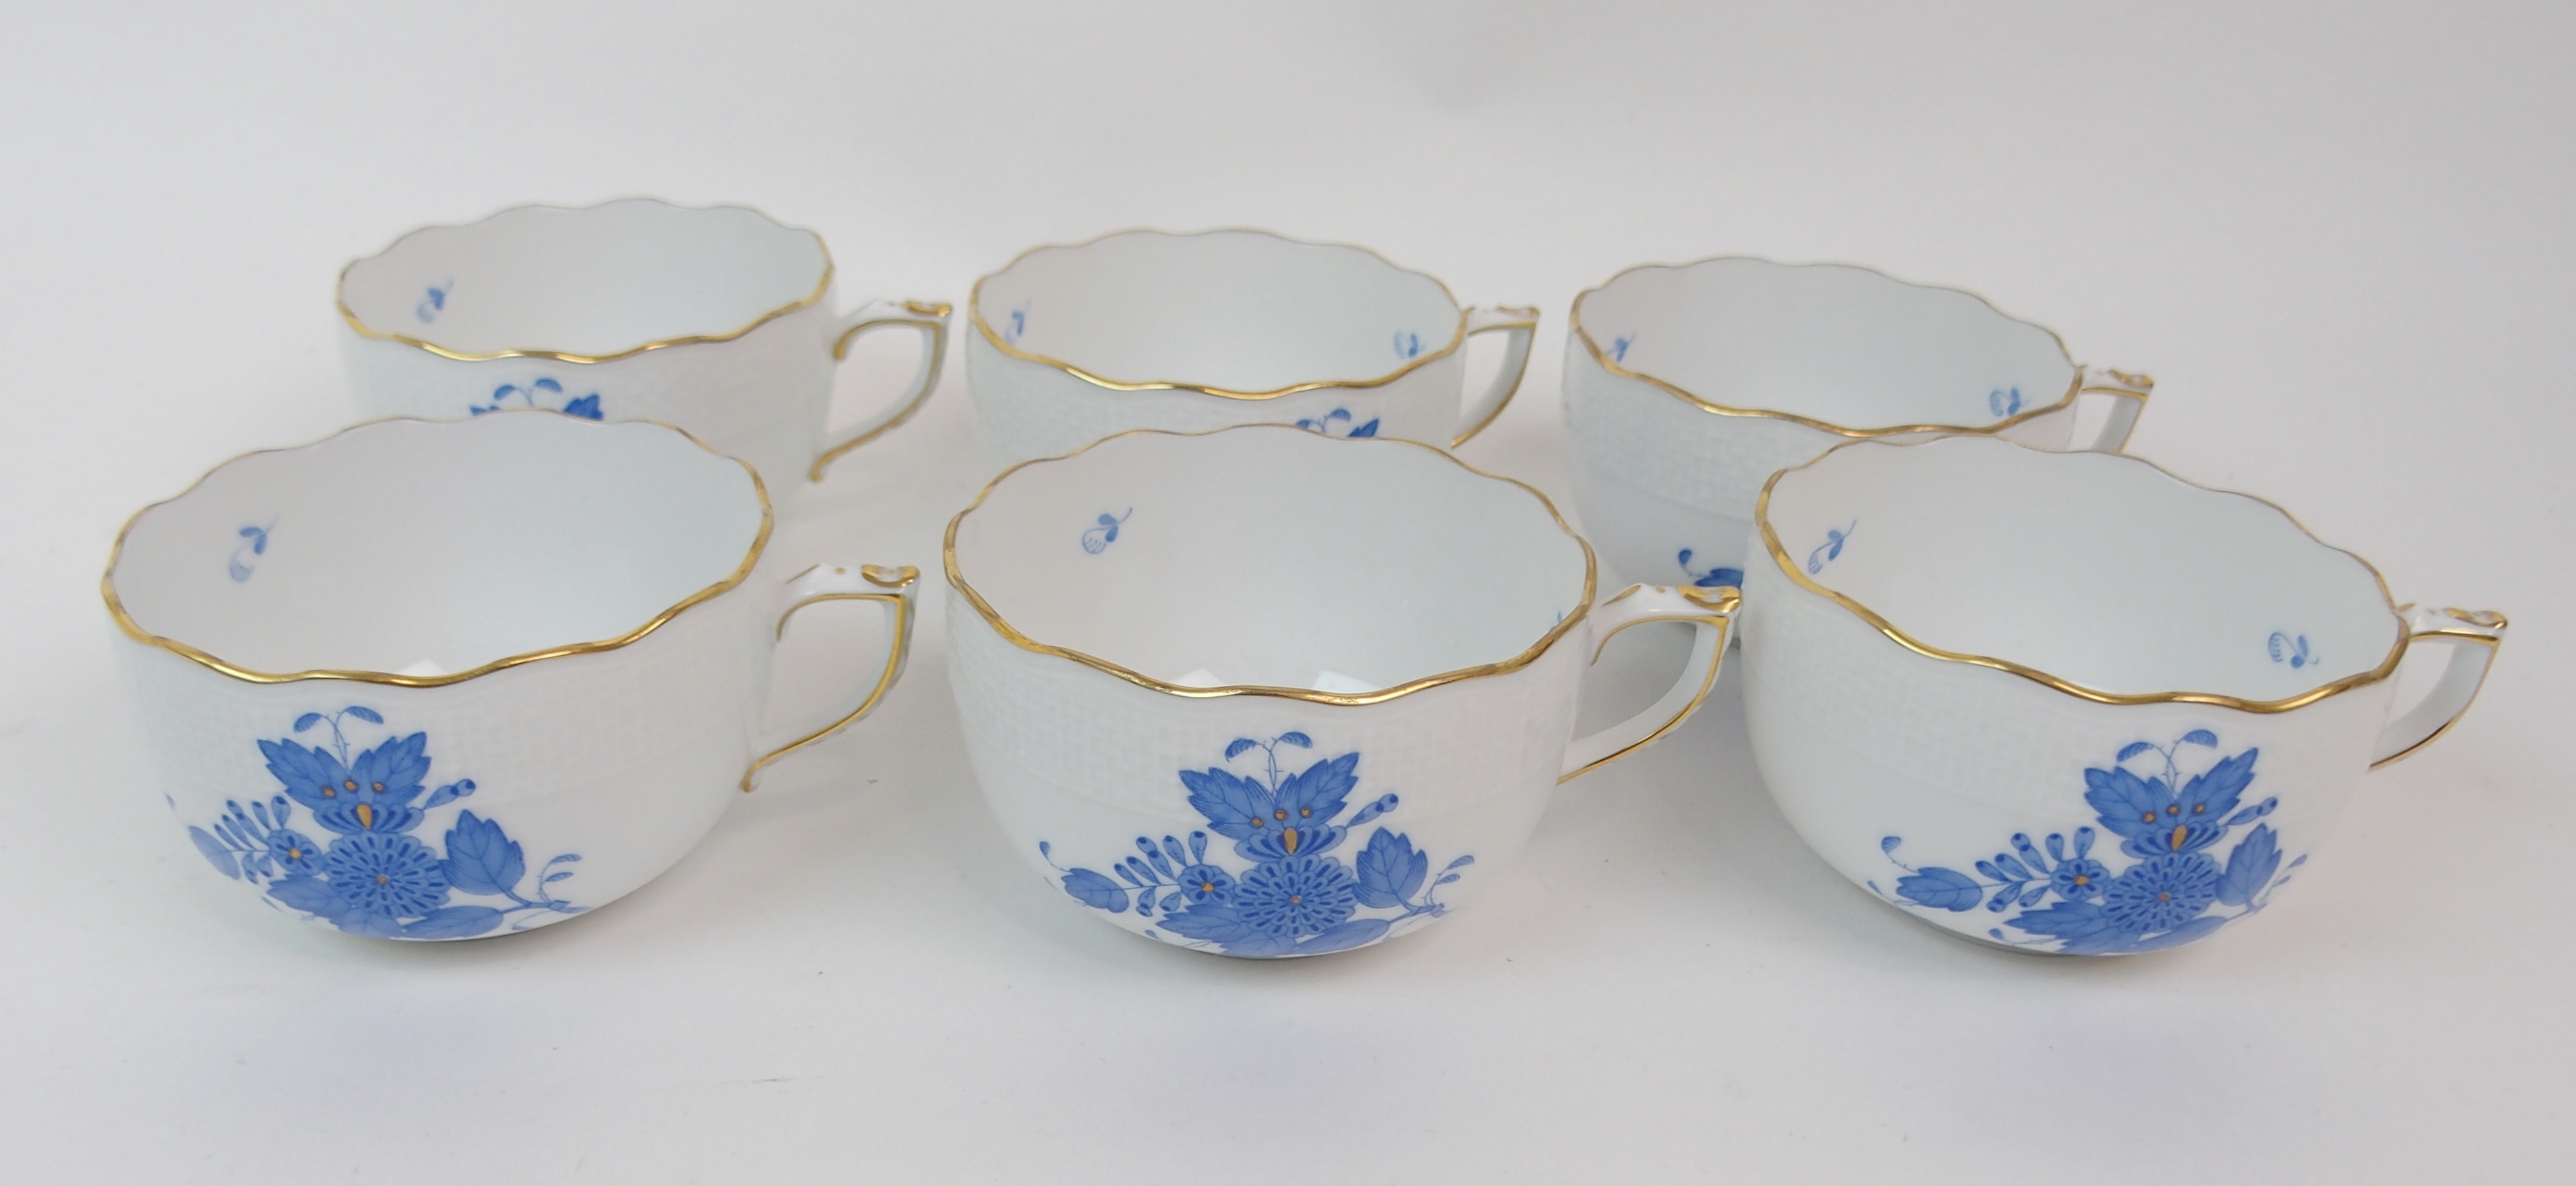 A HEREND CHINESE BOUQUET BLUE PATTERN TEASET comprising teapot, six cups, saucers, plates, milk - Image 14 of 14